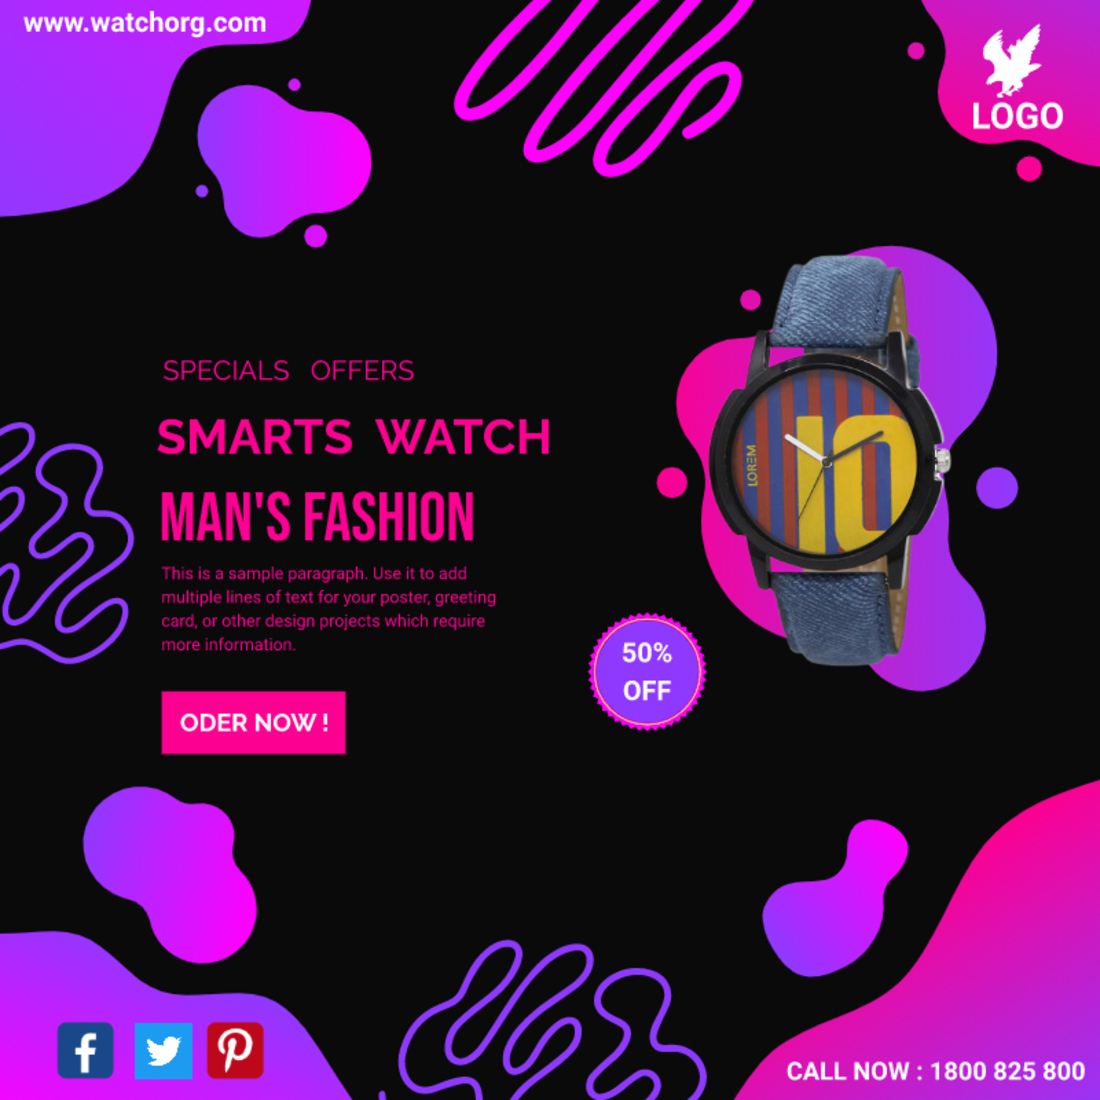 Social Media Man Watch Sales Banner cover image.